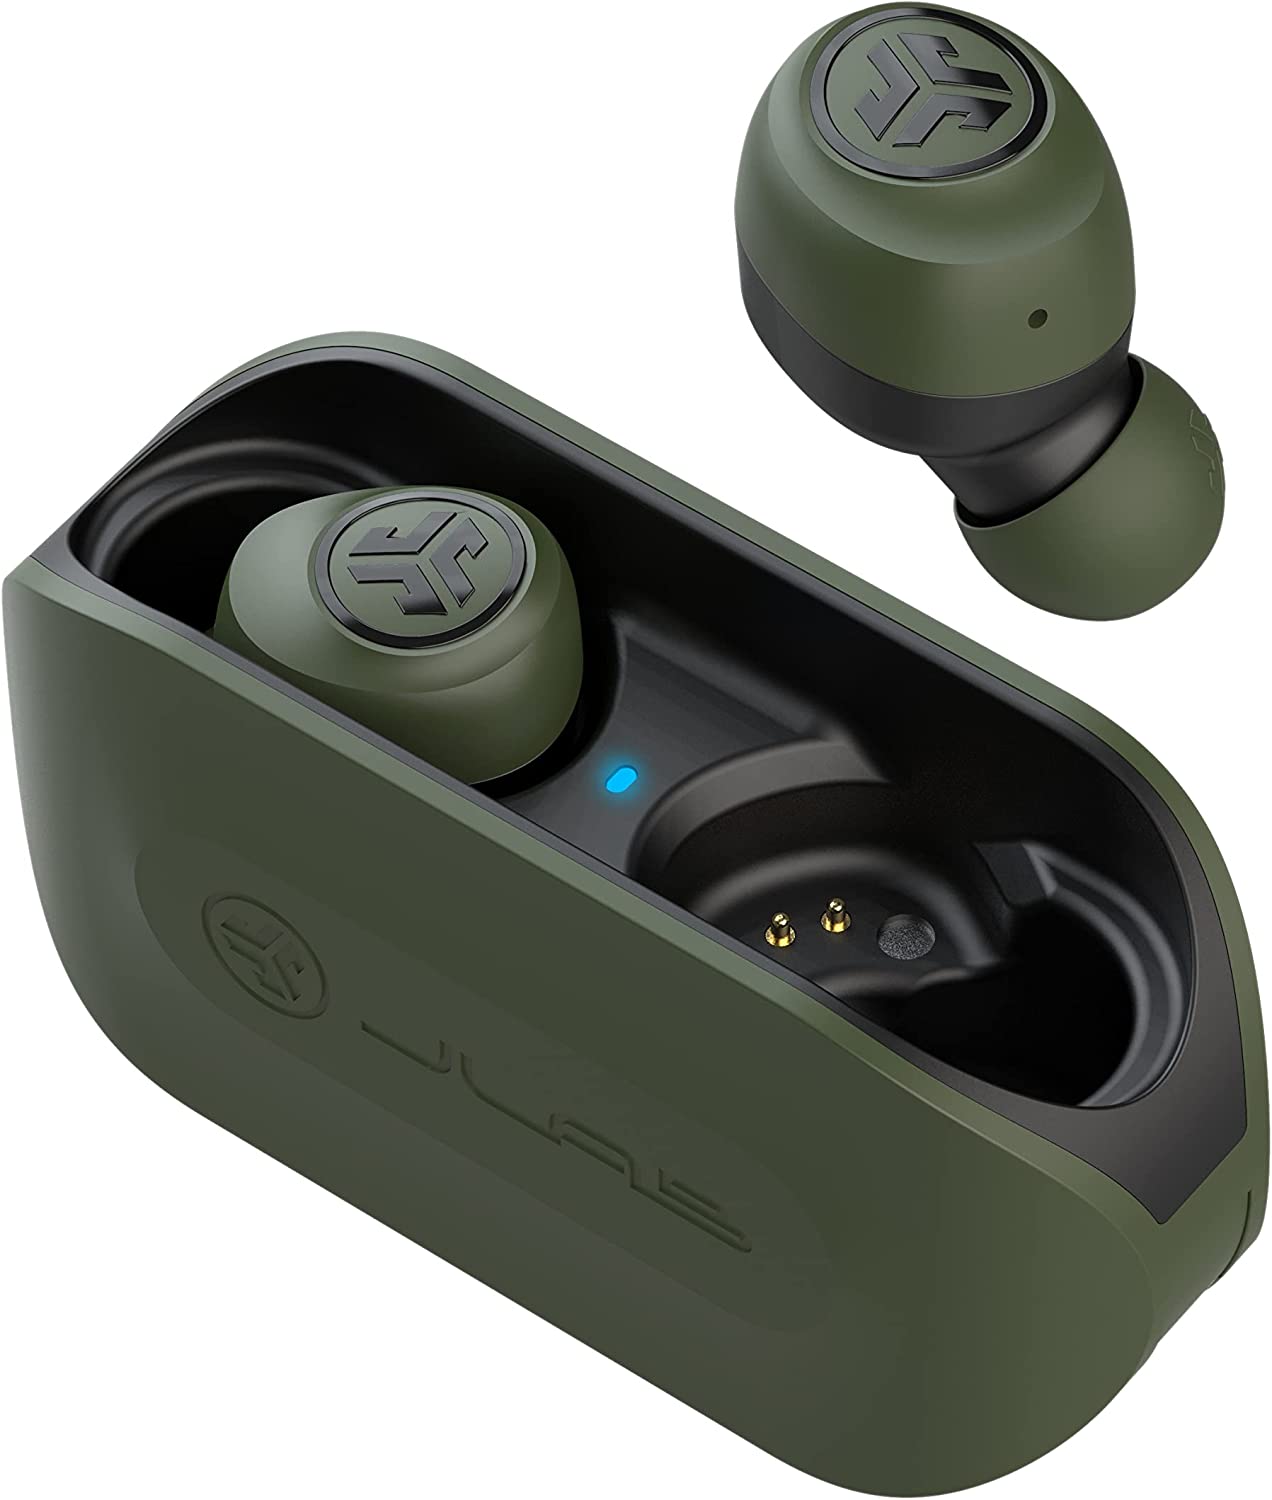 JLab Go Air True Wireless Bluetooth Earbuds + Charging Case | Green | Dual Connect | IP44 Sweat Resistance | Bluetooth 5.0 Connection | 3 EQ Sound Settings: JLab Signature, Balanced, Bass Boost